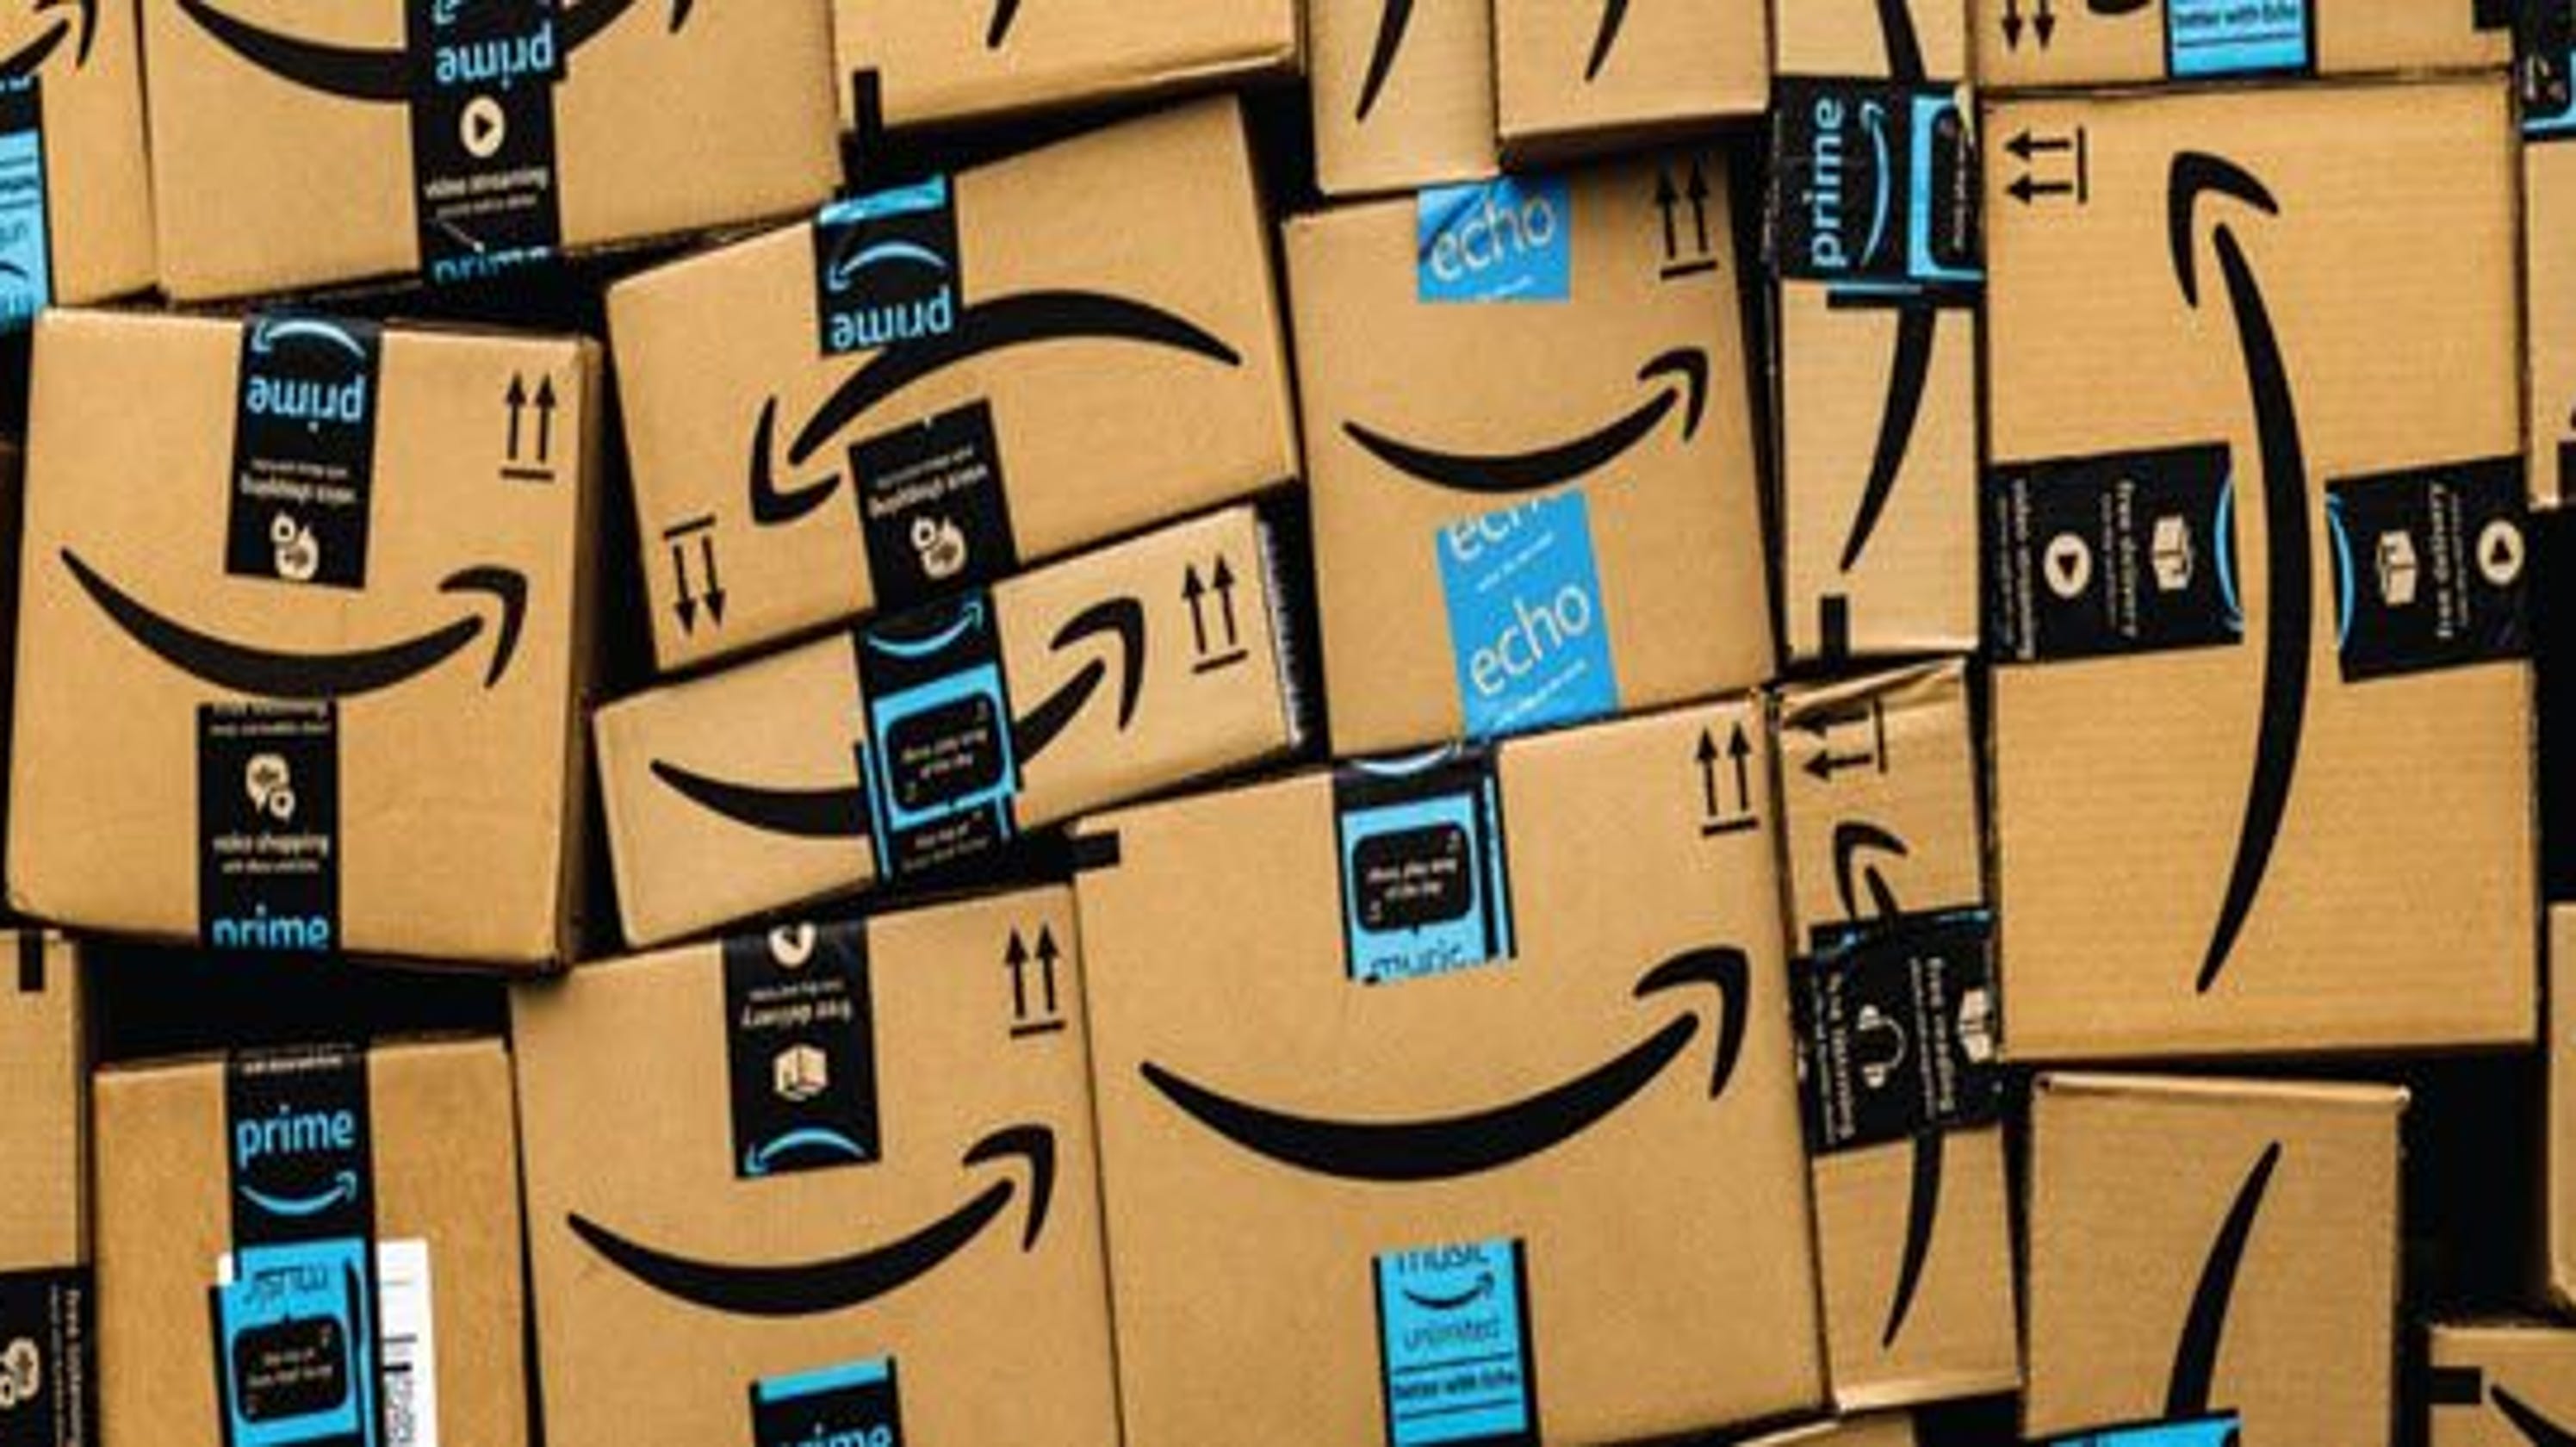 Amazon: Prime Day sales surpassed Black Friday, Cyber Monday combined